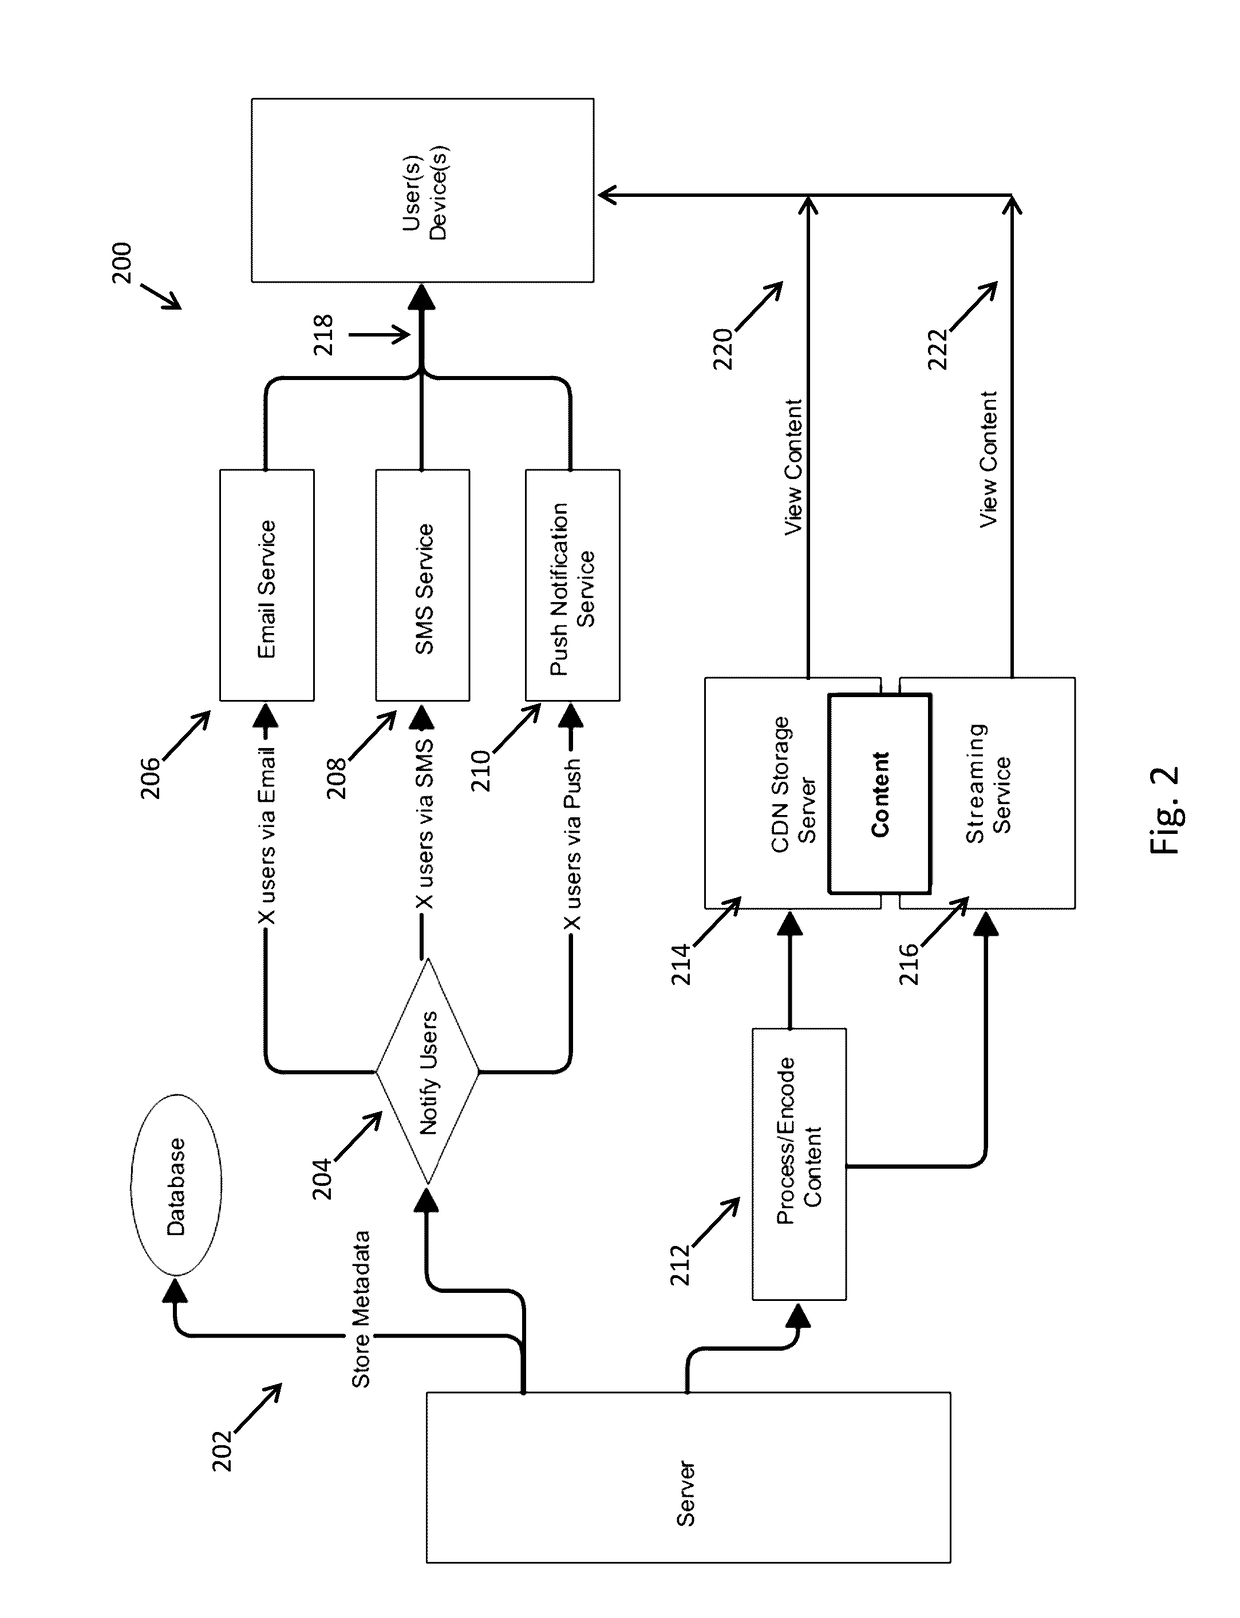 System and method for sharing mobile video and audio content